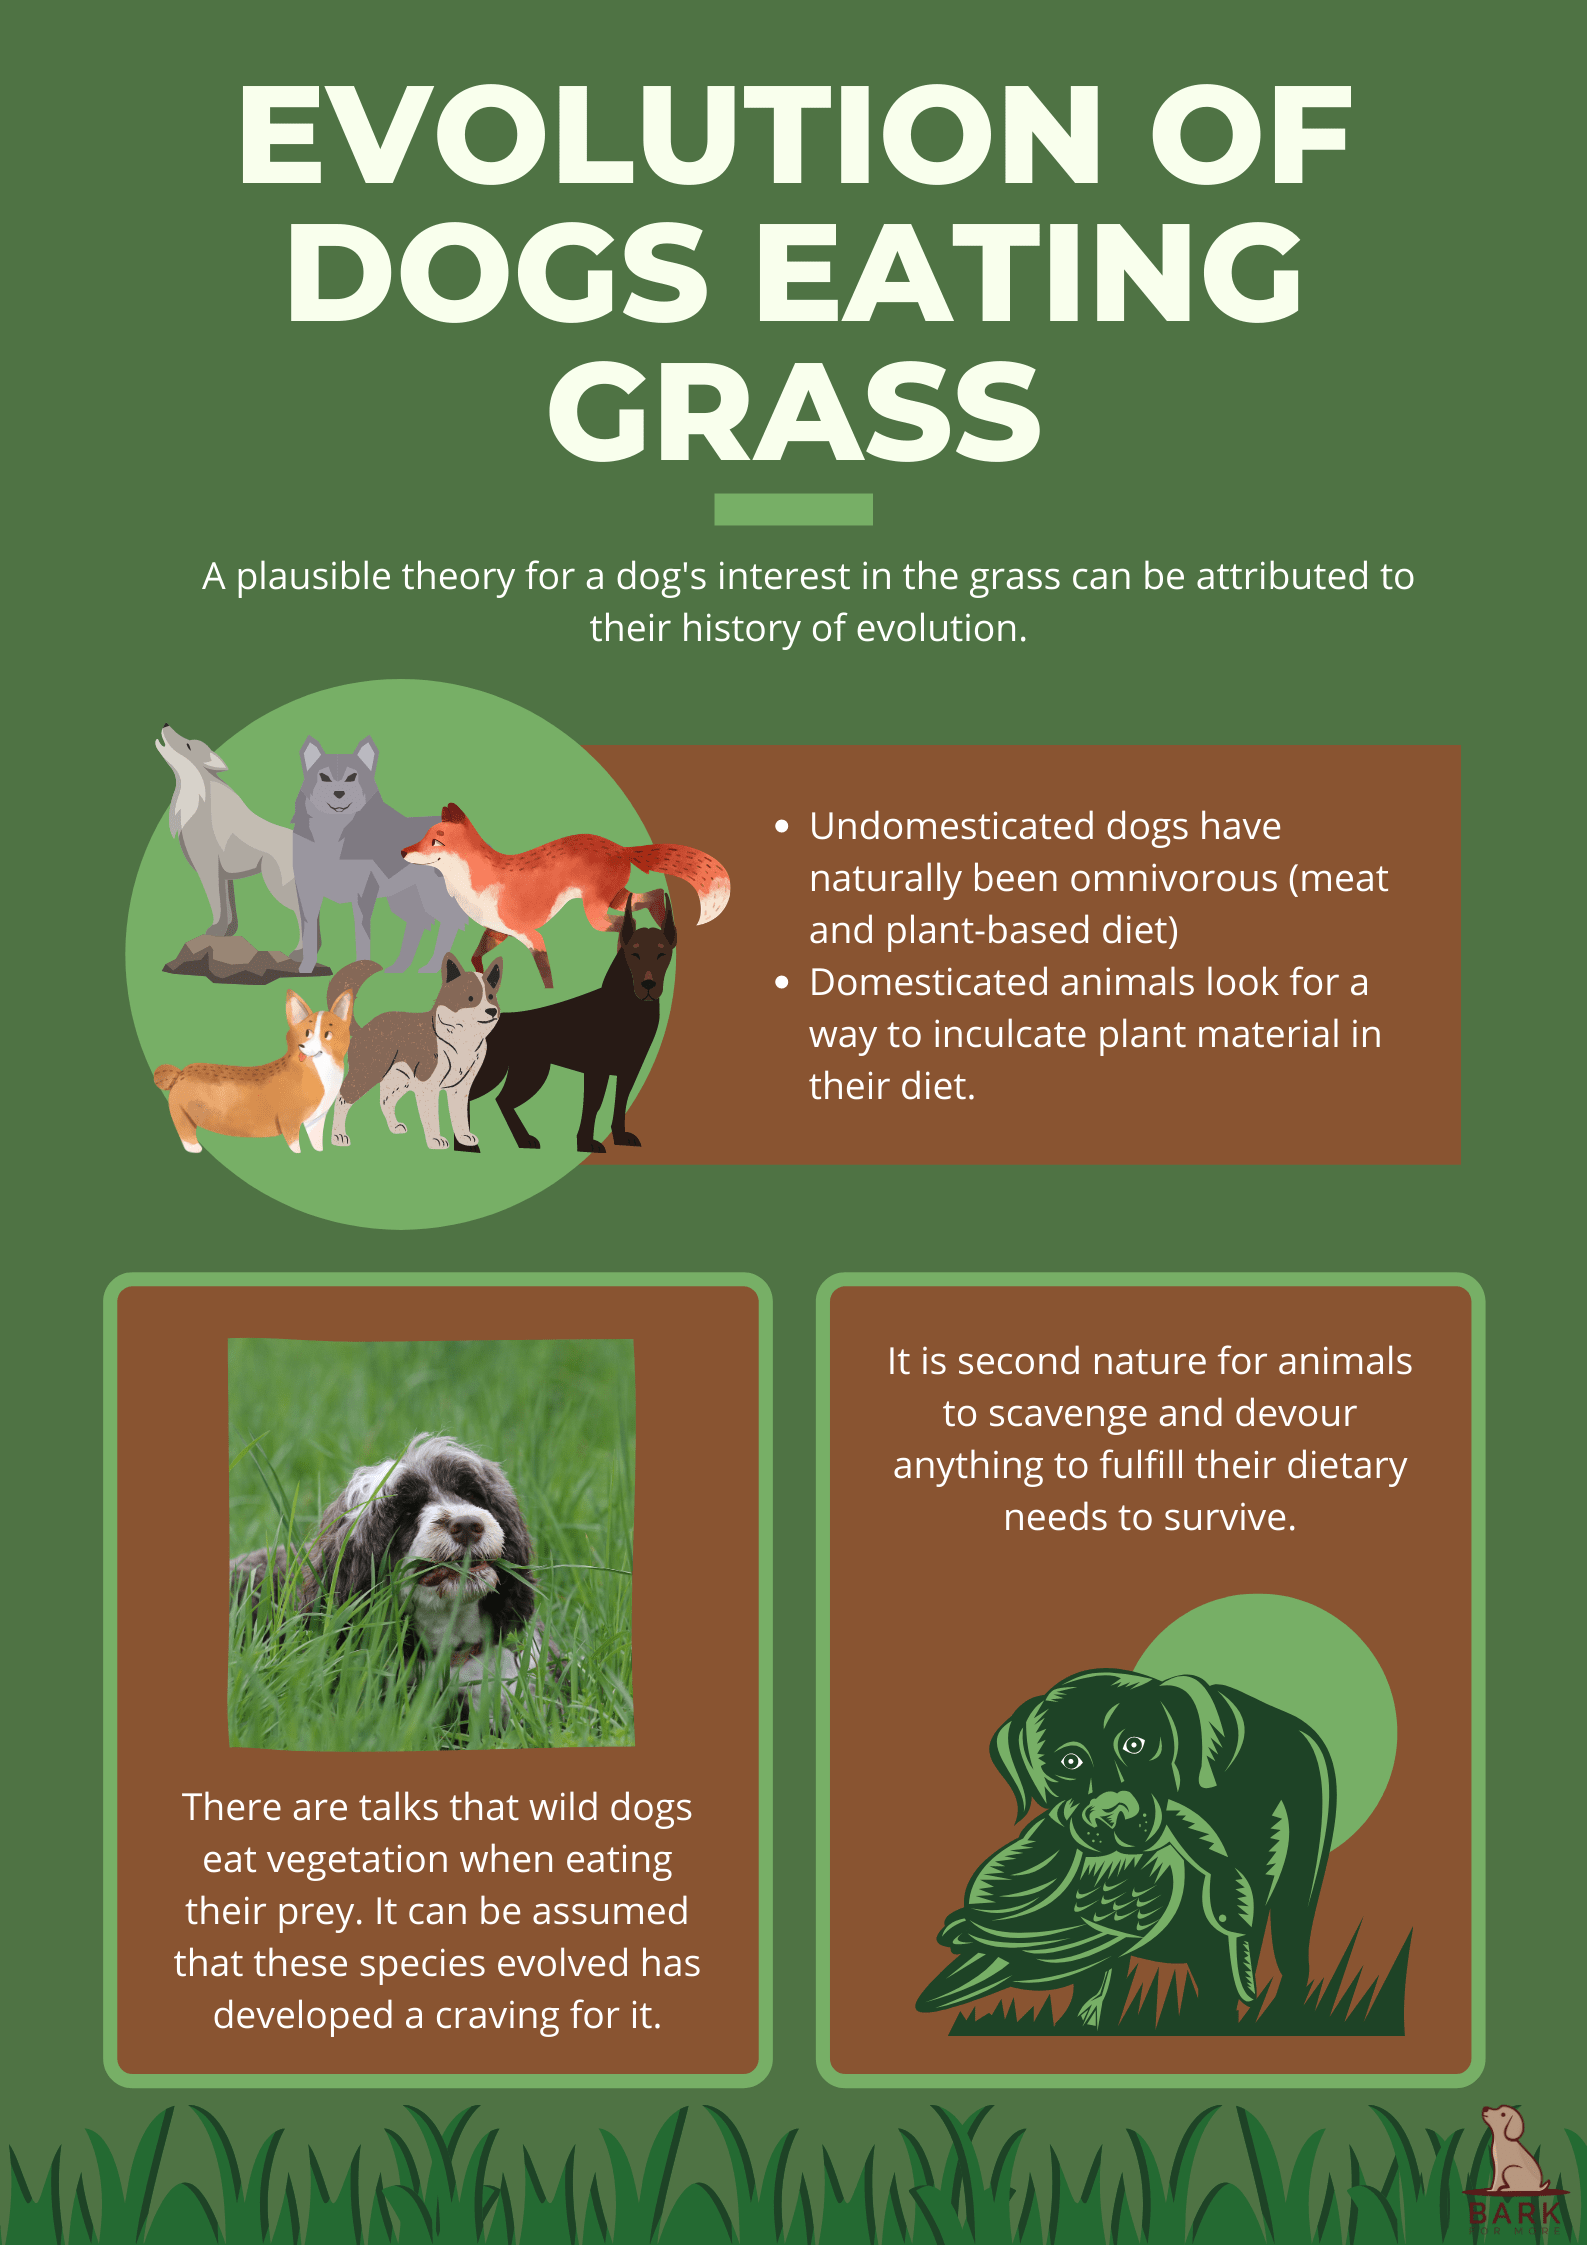 Evolution of dogs eating grass